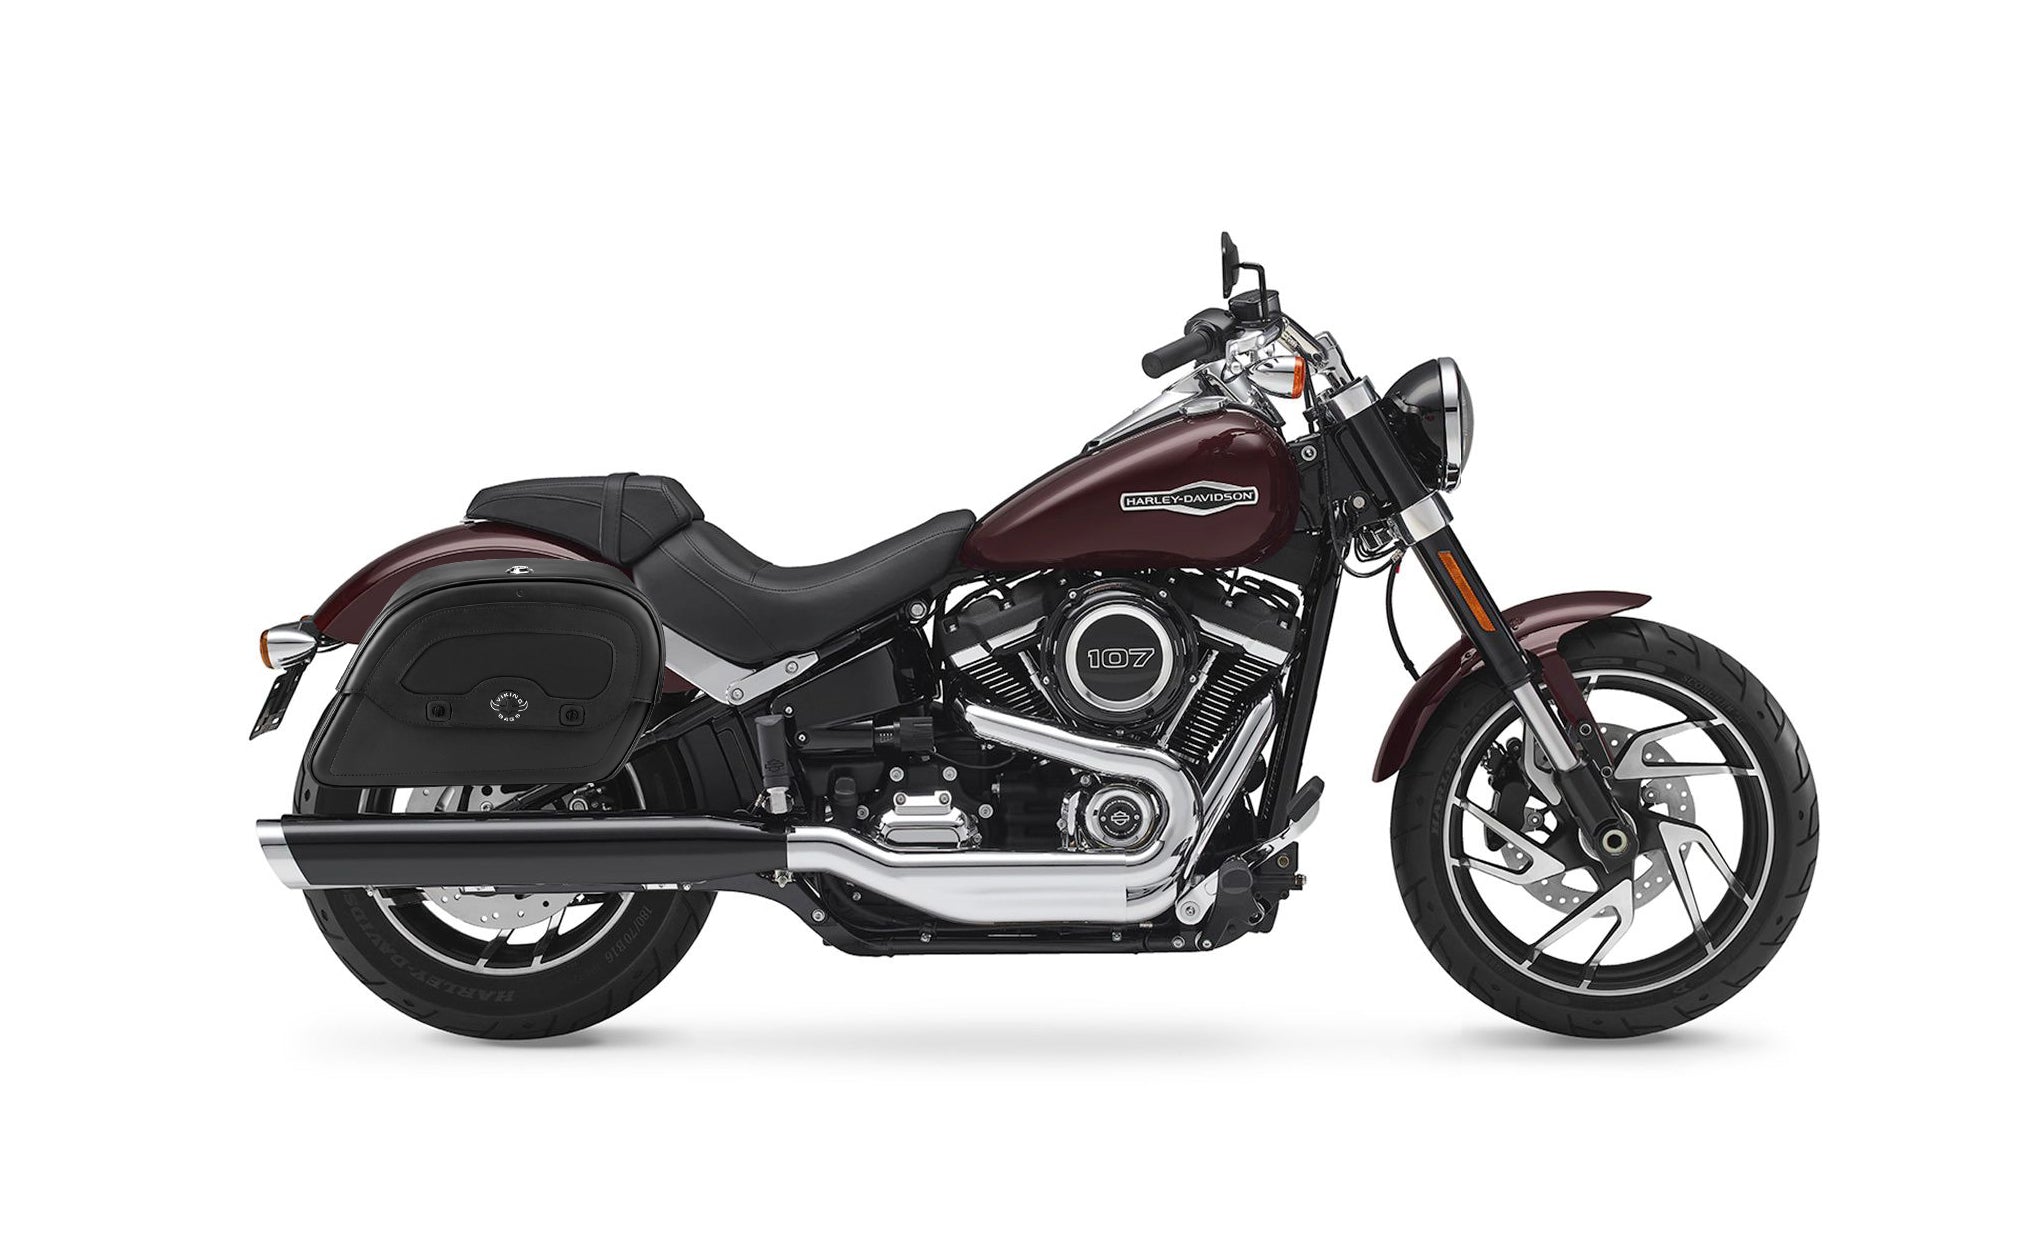 28L - Warrior Medium Quick-Mount Motorcycle Saddlebags For Harley Softail Sport Glide @expand